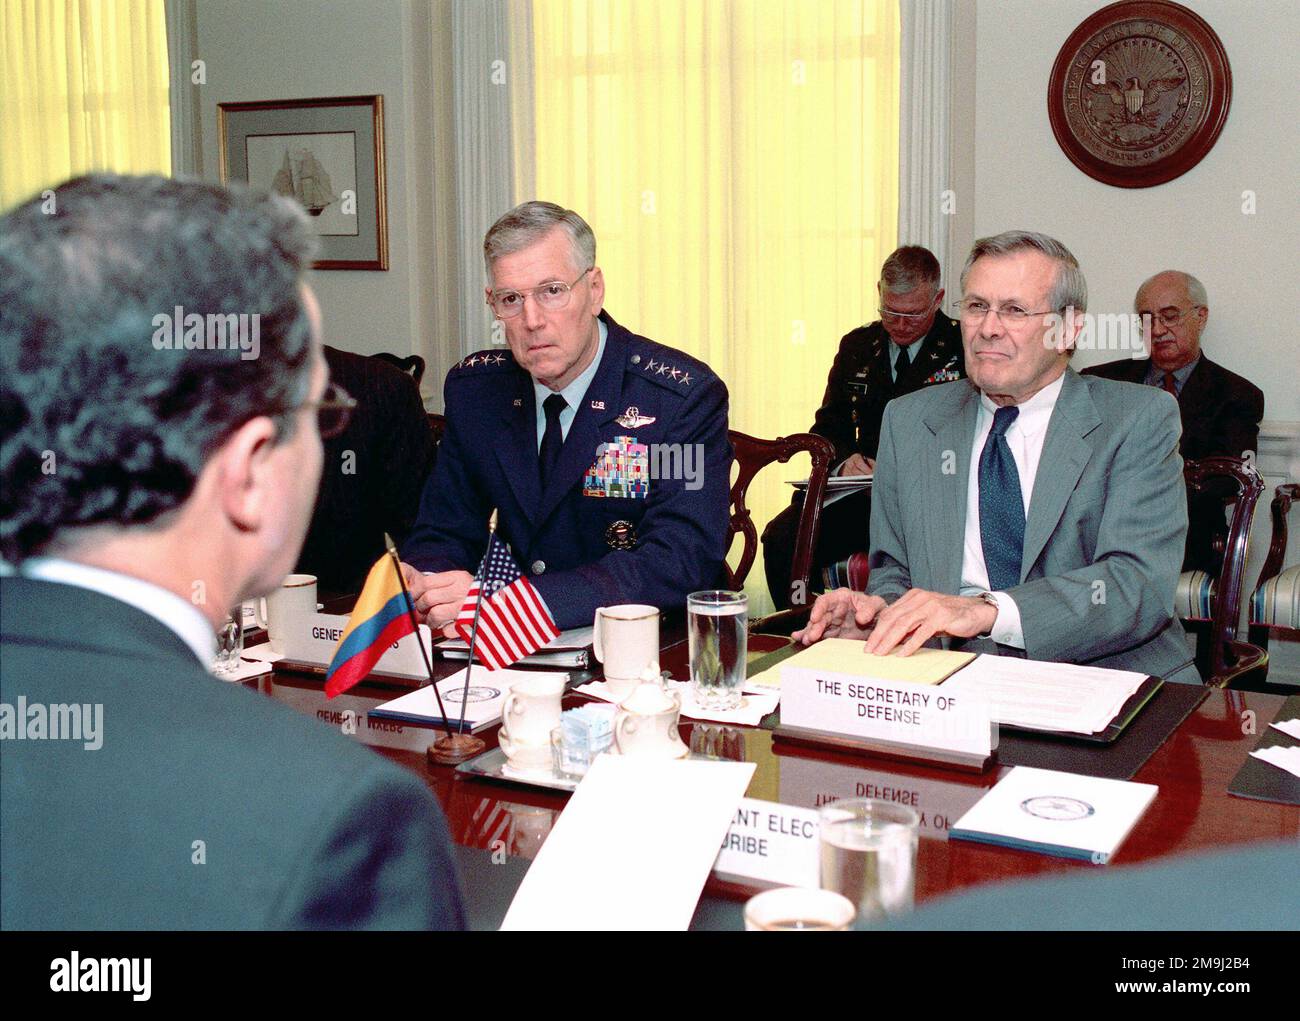 US Air Force (USAF) General (GEN) Richard B. Myers (left) Chairman of the Joint Chiefs of STAFF, and US Secretary of Defense, The Honorable Donald H. Rumsfeld, meet with Republic of Columbia, President-elect Alvaro Uribe, (foreground) during a defense meeting held at the Pentagon in Washington, District of Columbia (DC). US Air Force (USAF) General (GEN) Richard B. Myers (left) Chairman of the Joint Chiefs of Staff, and US Secretary of Defense, The Honorable Donald H. Rumsfeld, meet with Republic of Columbia, President-elect Alvaro Uribe, (foreground) during a defense meeting held at the Penta Stock Photo